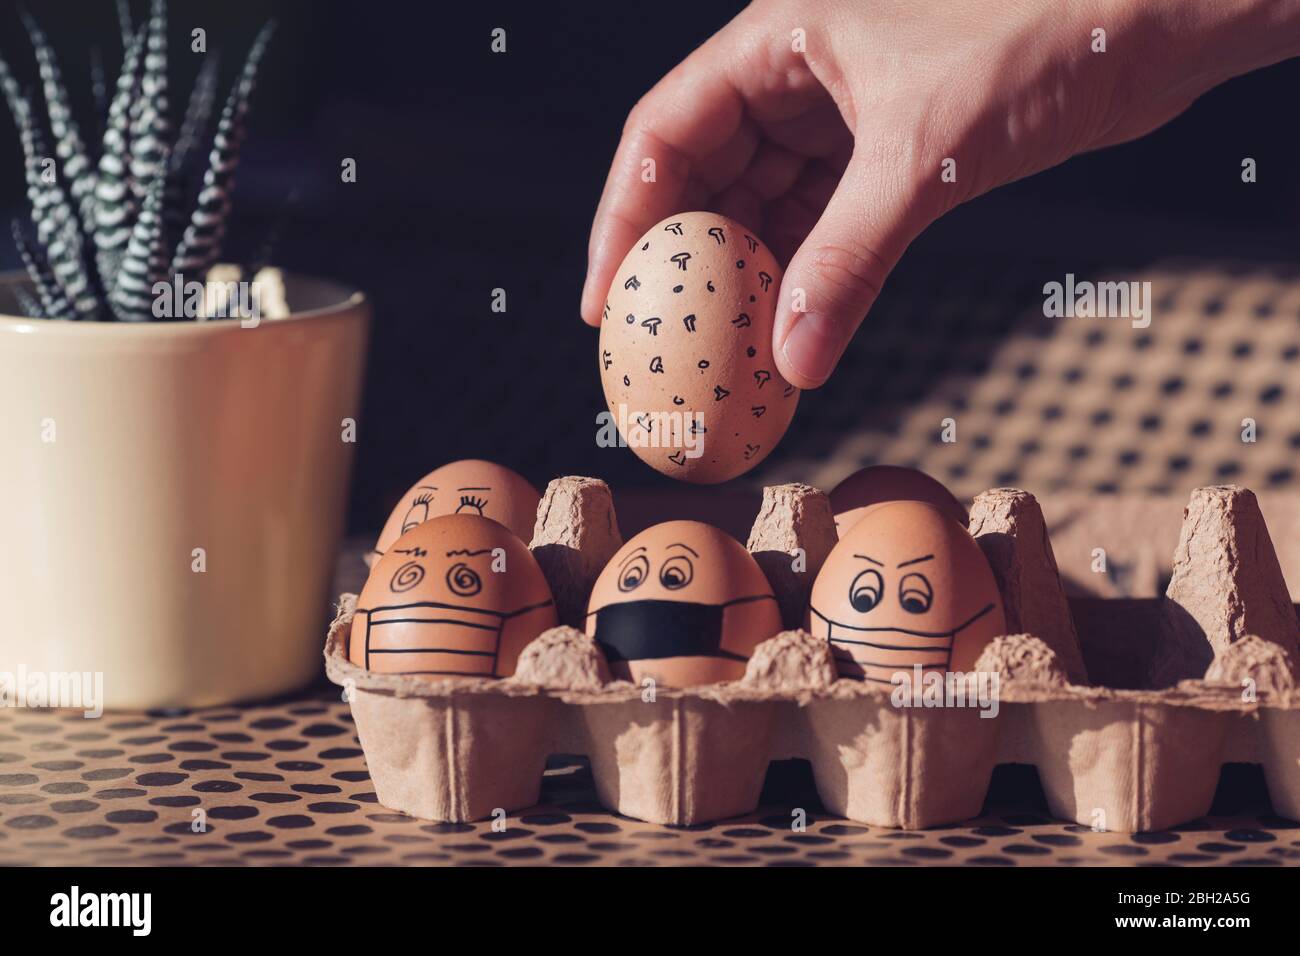 Easter eggs with face masks in a cardboard box Stock Photo